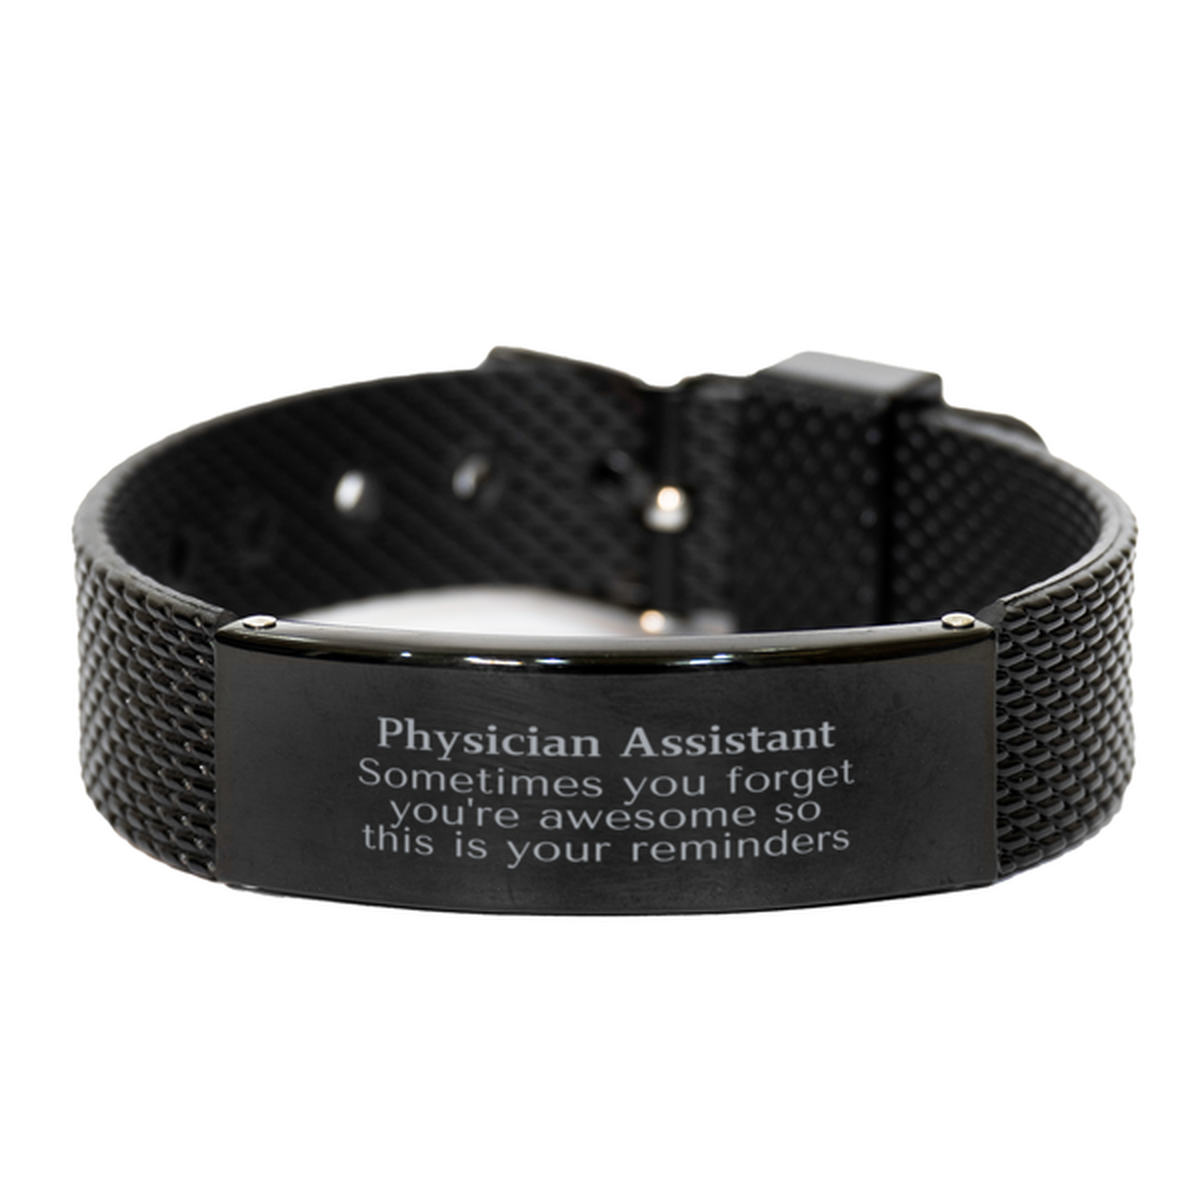 Sentimental Physician Assistant Black Shark Mesh Bracelet, Physician Assistant Sometimes you forget you're awesome so this is your reminders, Graduation Christmas Birthday Gifts for Physician Assistant, Men, Women, Coworkers